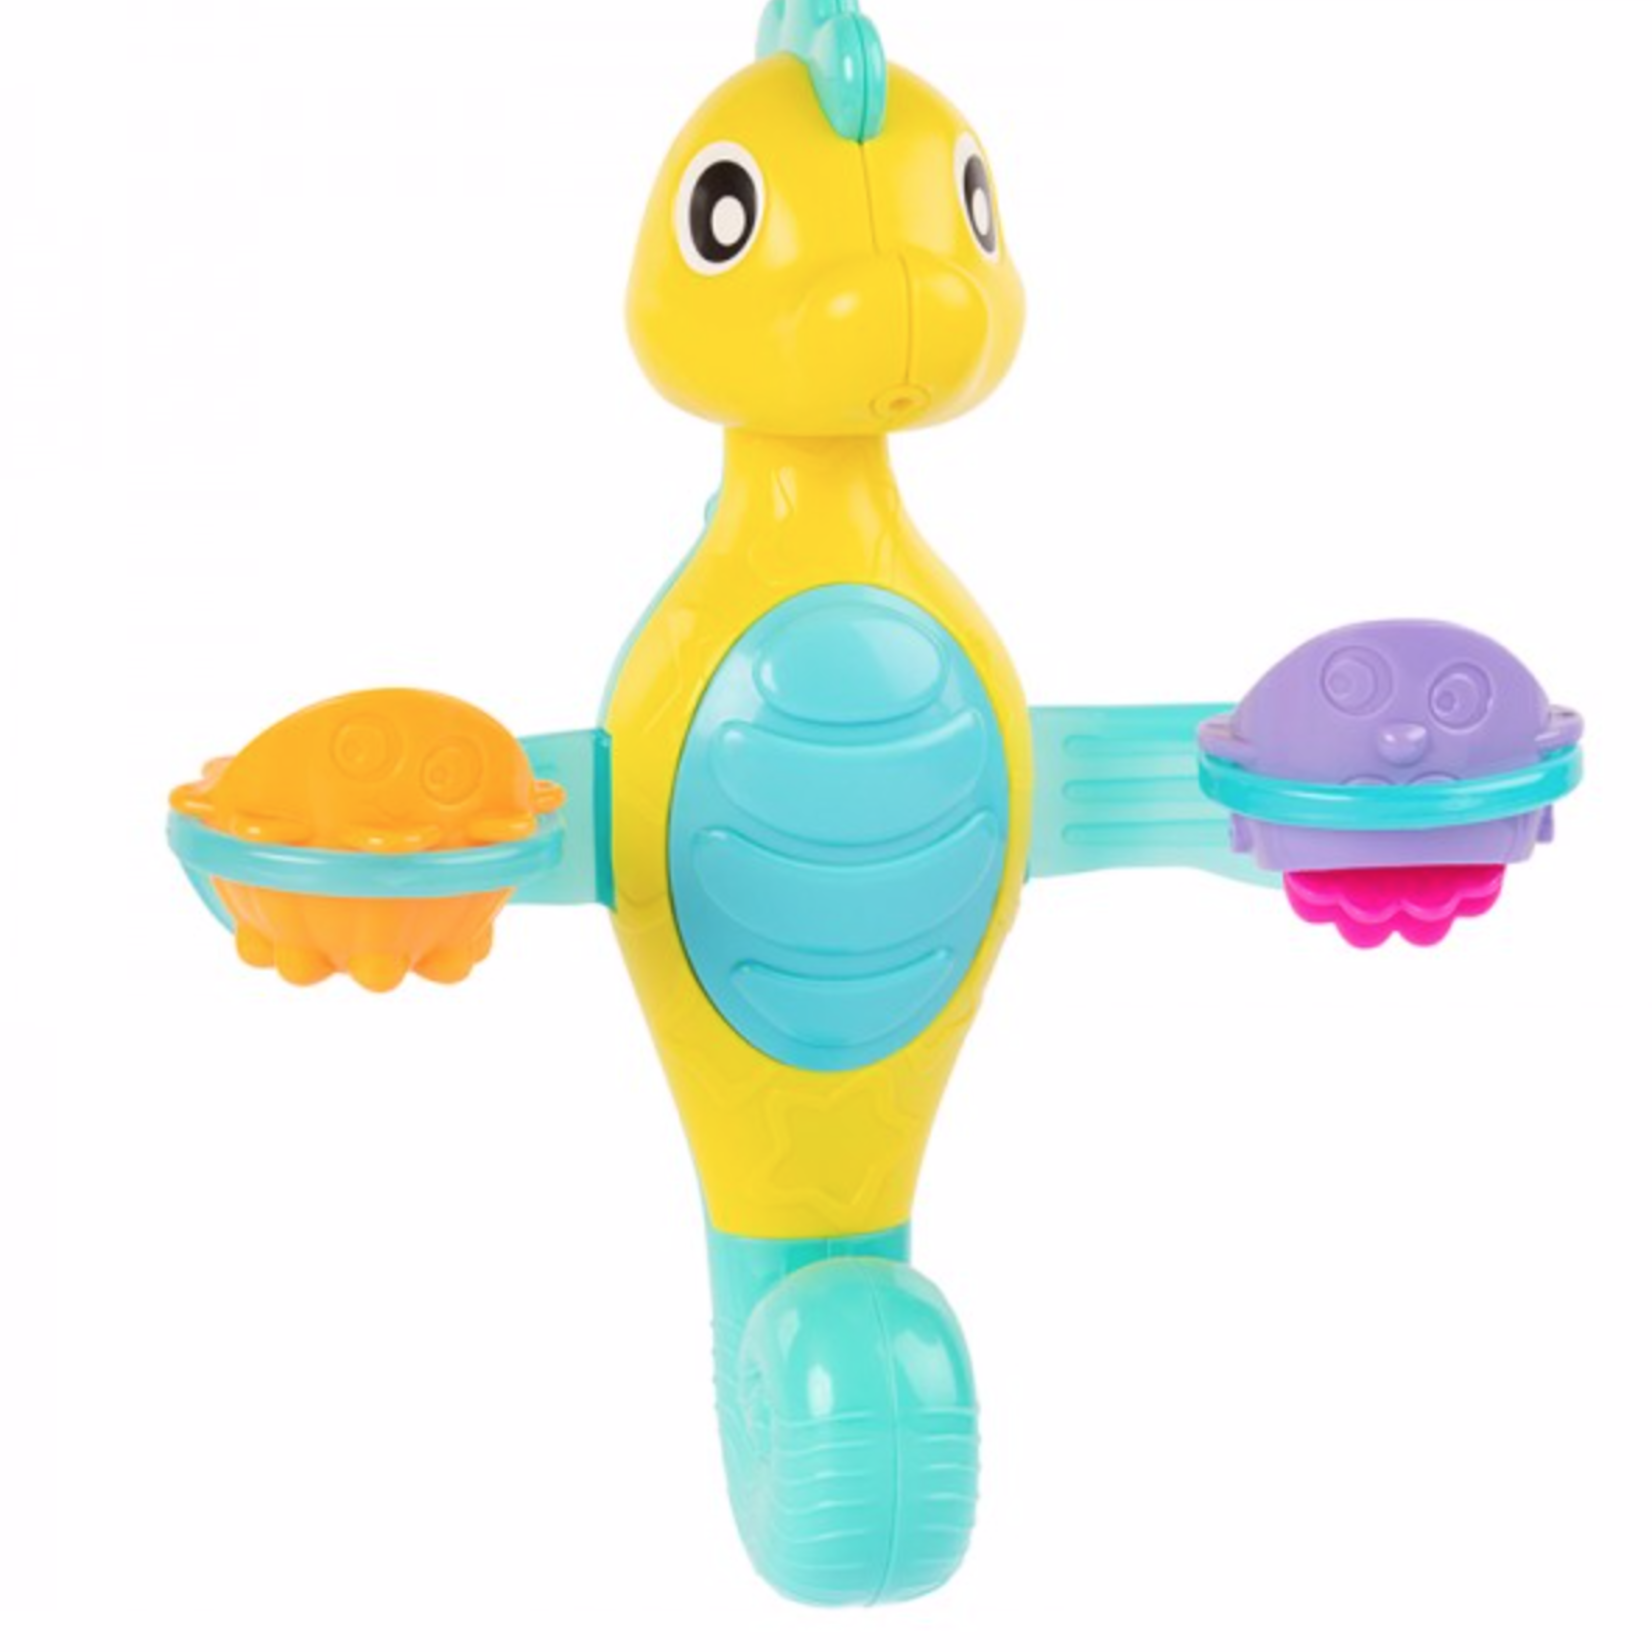 Playgro Playgro - Fountains of Fun Seahorse and Cups